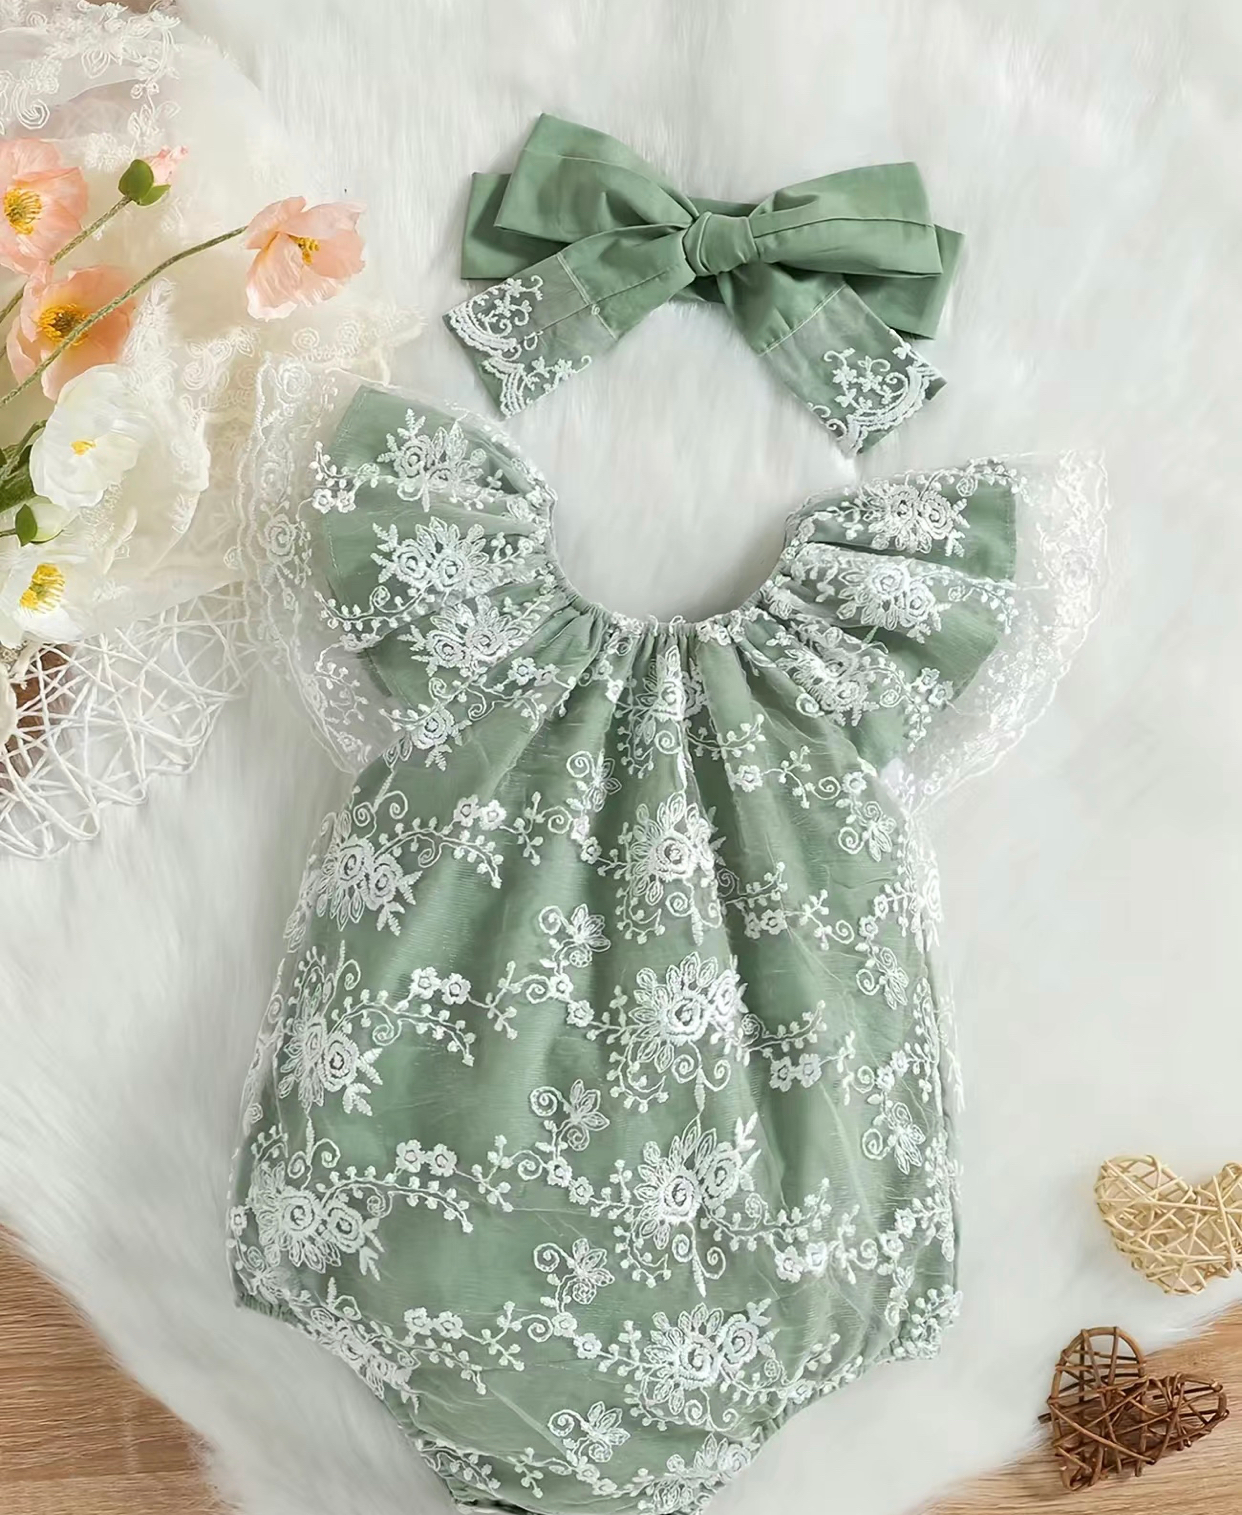 Infant Green Lace Embroidered Romper